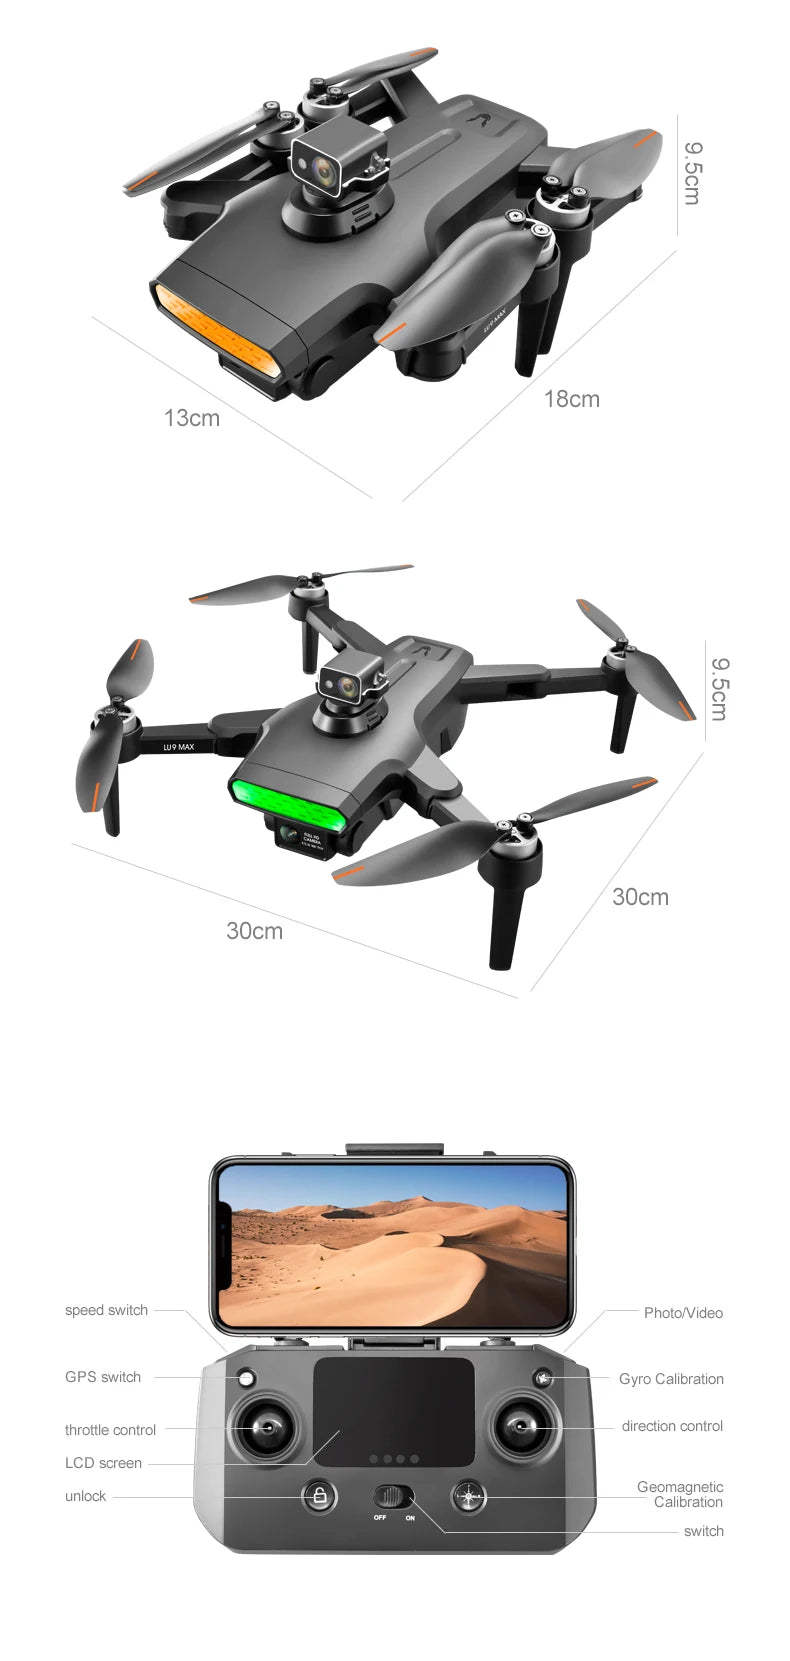 LU9 Max GPS Drone, GPS switch Gyro Calibration throttle control direction control LCD screen Geomagnetic unlock